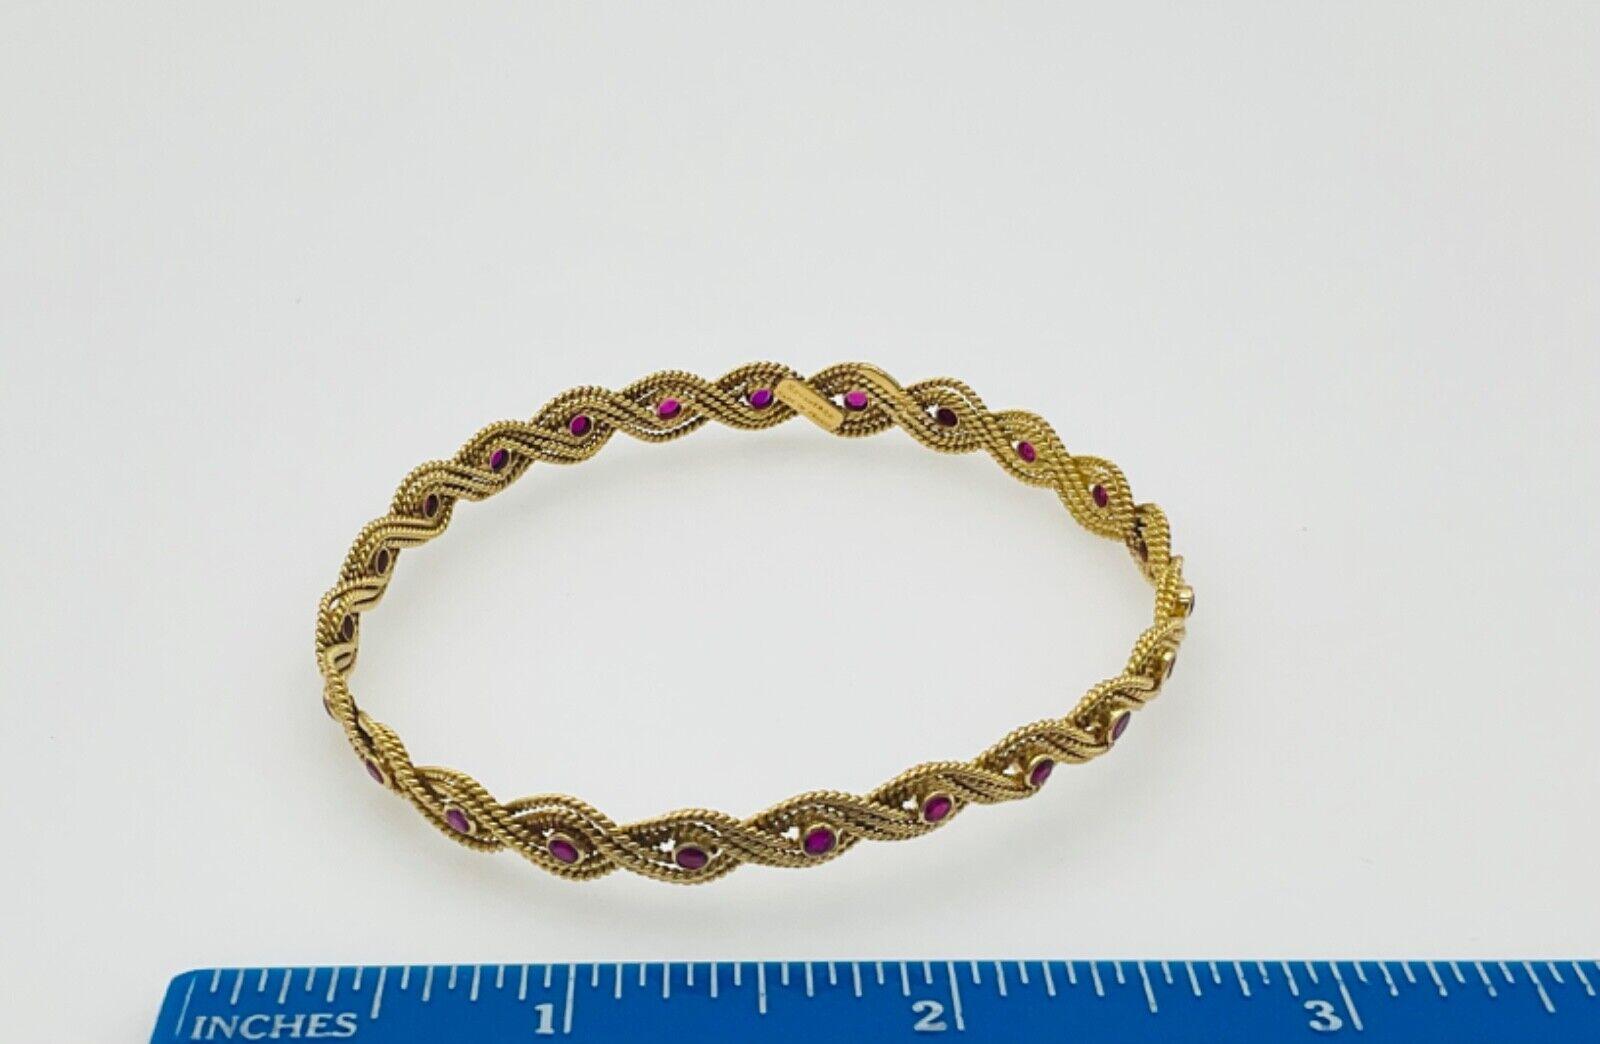 BOUCHERON PARIS 18k Yellow Gold & Ruby Woven Bangle Bracelet Vintage C. 1960s In Excellent Condition For Sale In Beverly Hills, CA